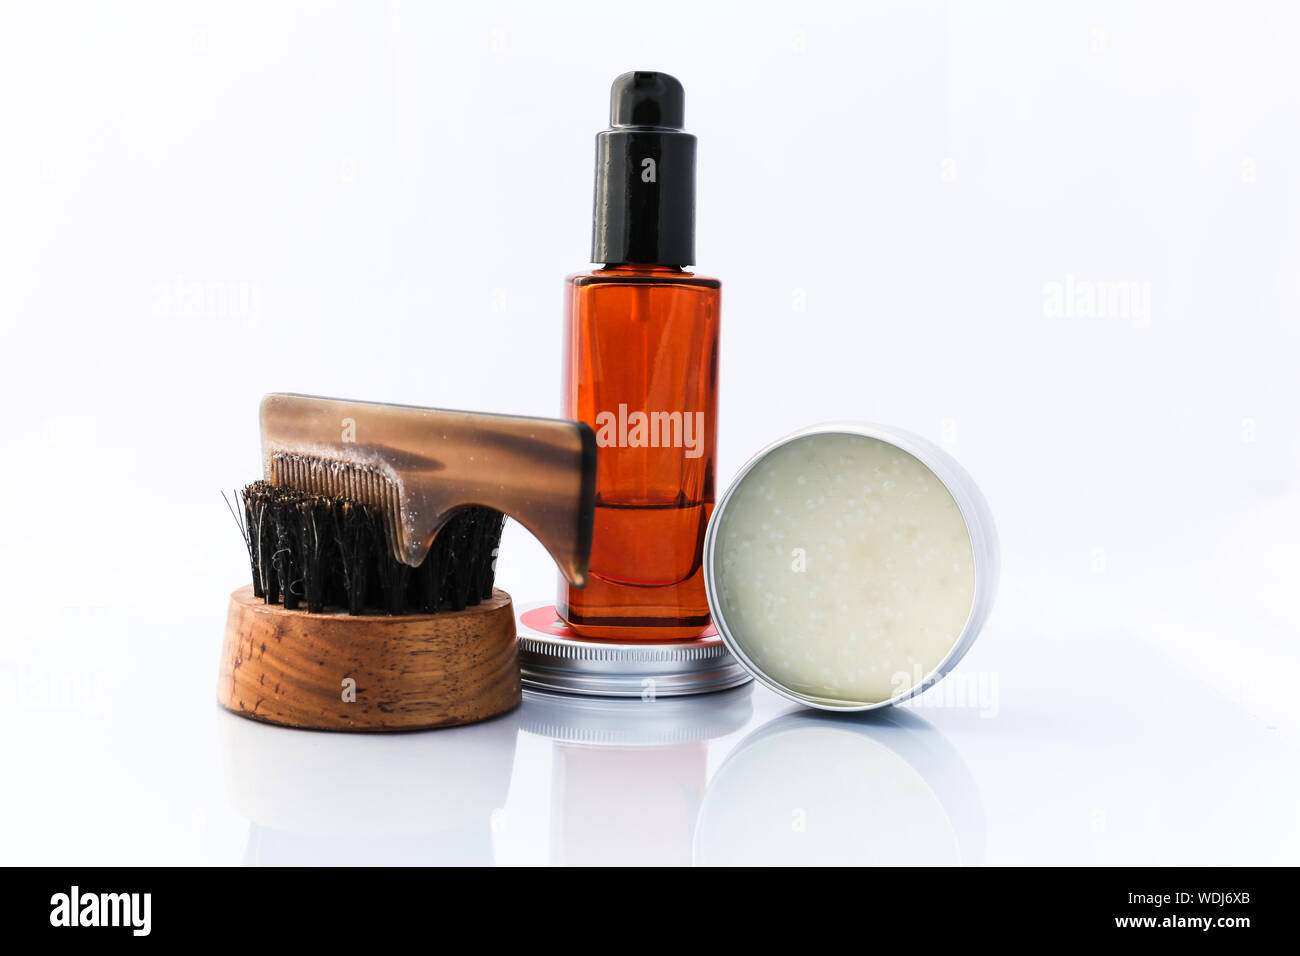 A selection of men's beard grooming products that include oil, wax and a brush, shot against a clean white background Stock Photo